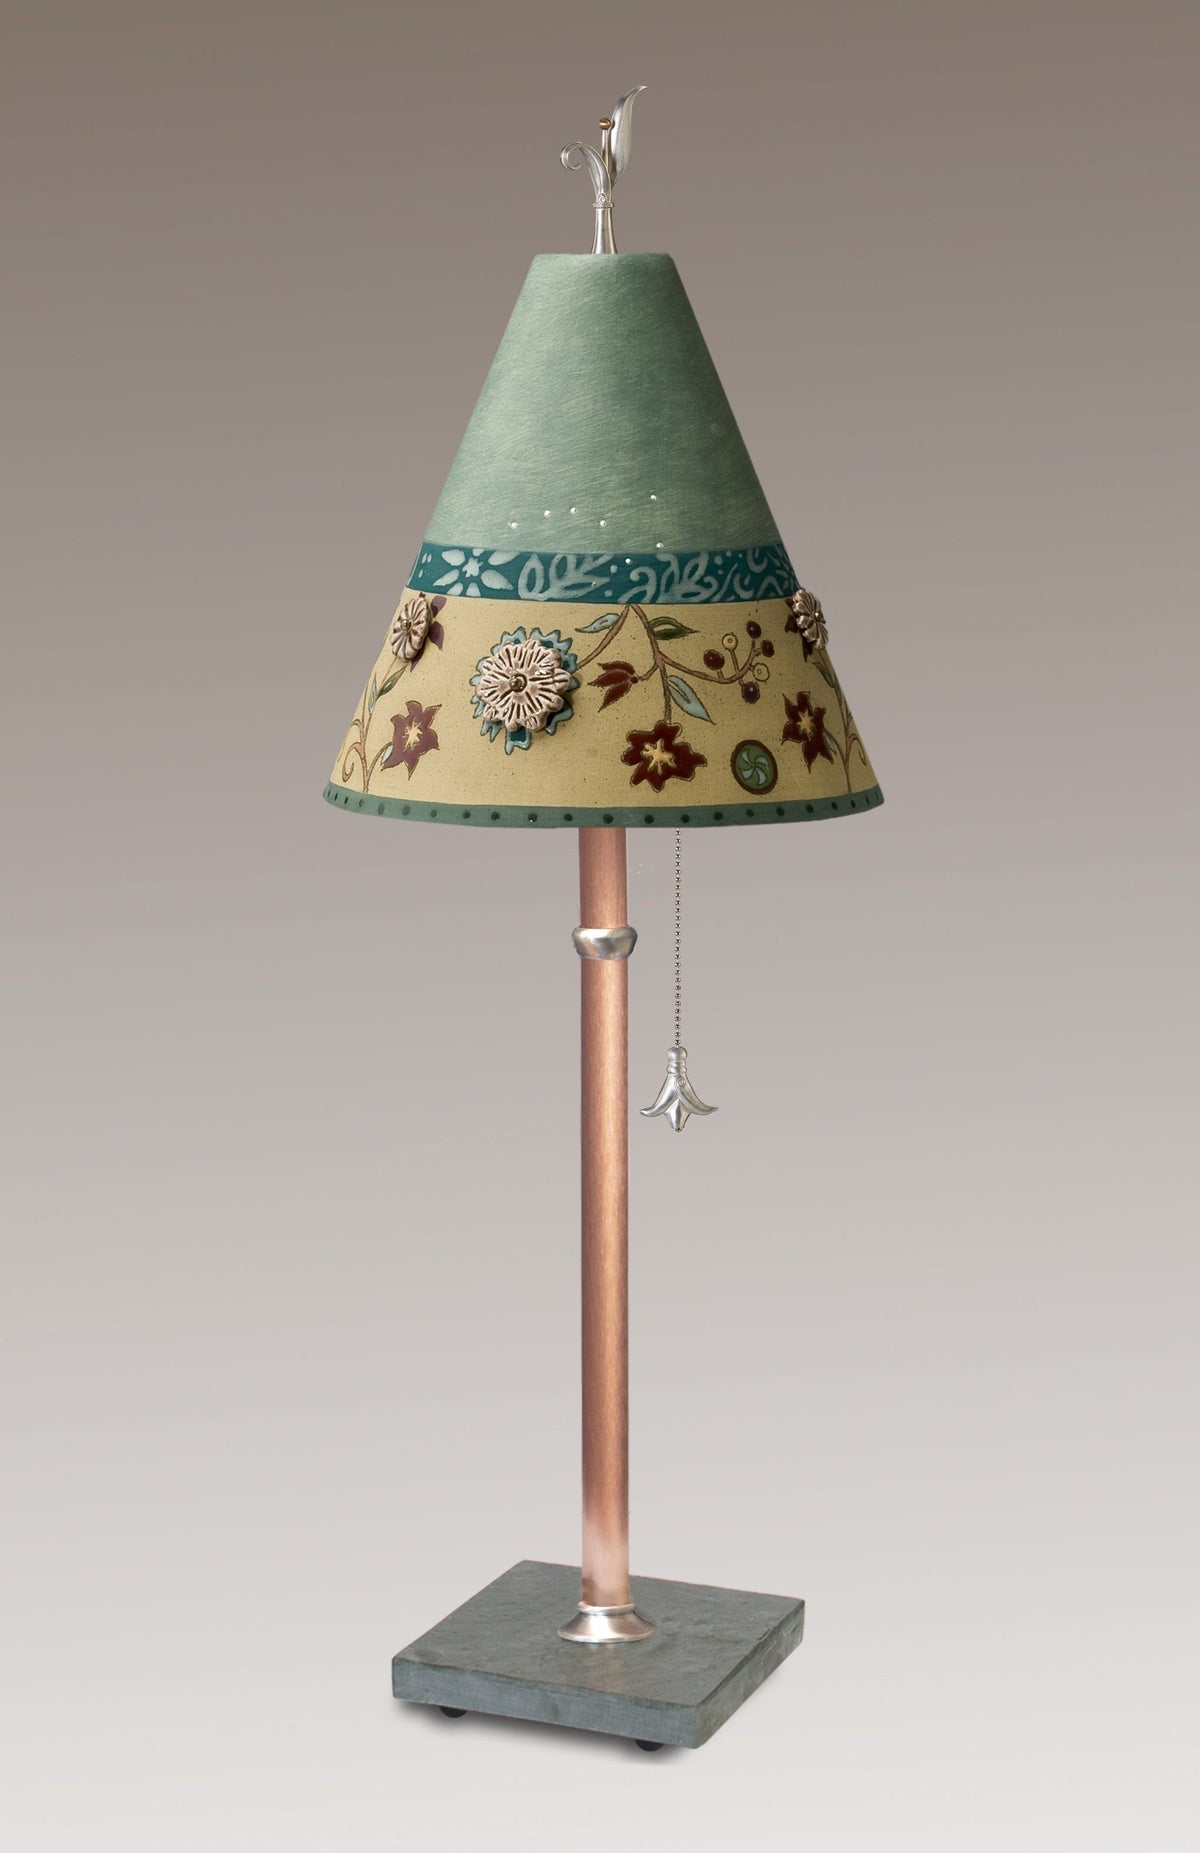 Copper Table Lamp with Small Conical Ceramic Shade in Eden Sea Glass